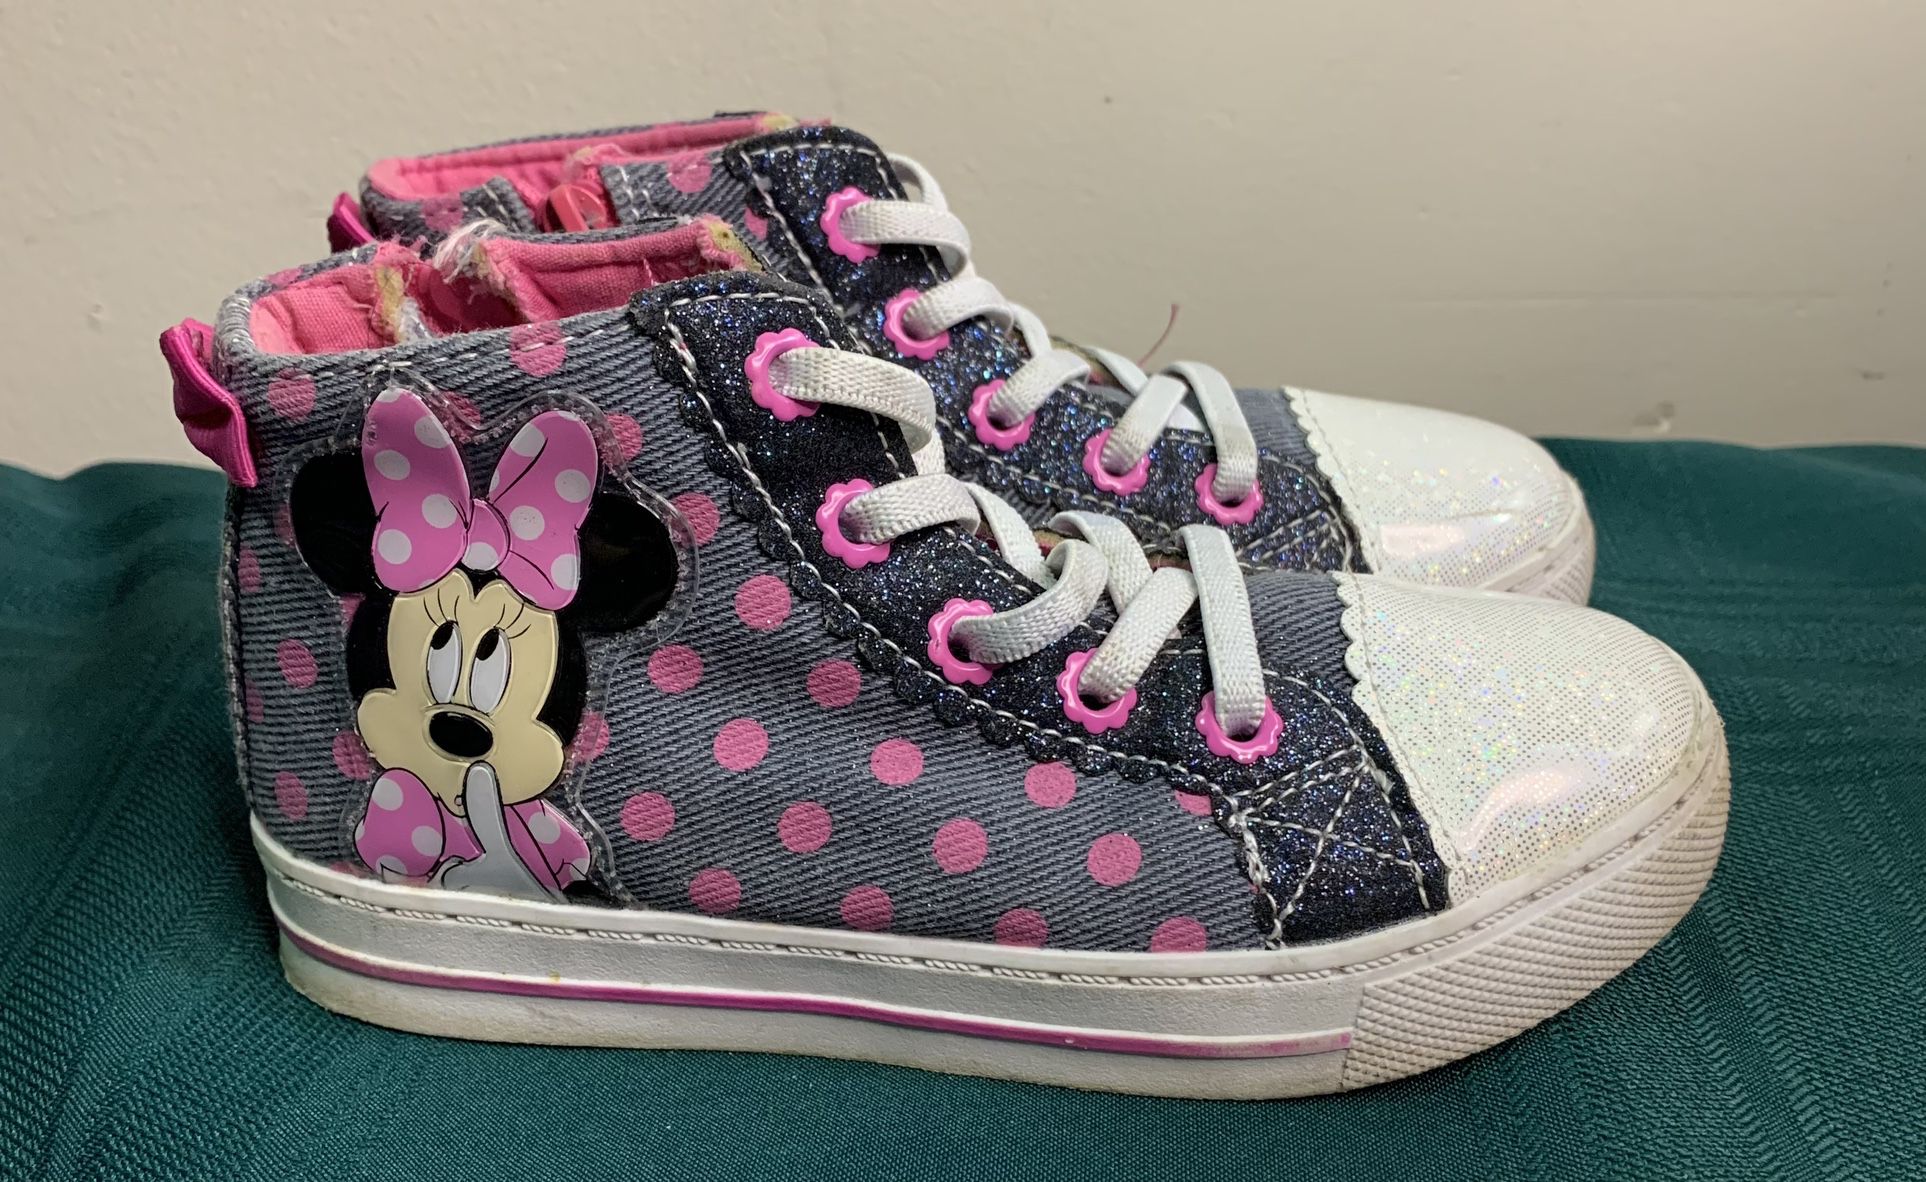 Disney Minnie Mouse girls size 11 high top sneakers shoes 